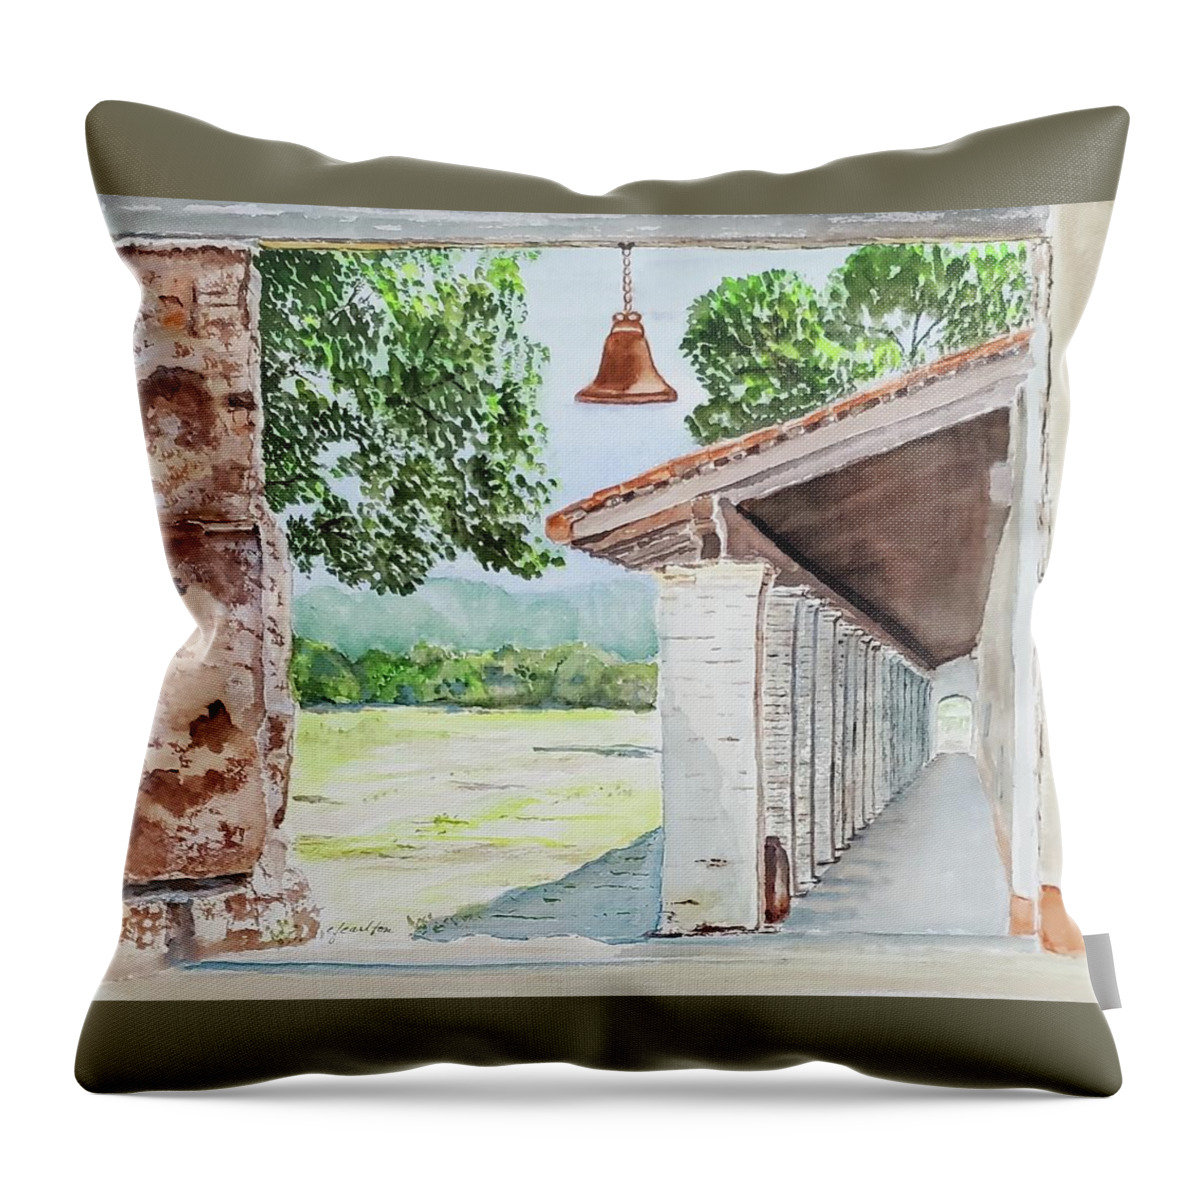 La Purisima Throw Pillow featuring the painting Mission Bell - La Purisima. Watercolor by Claudette Carlton